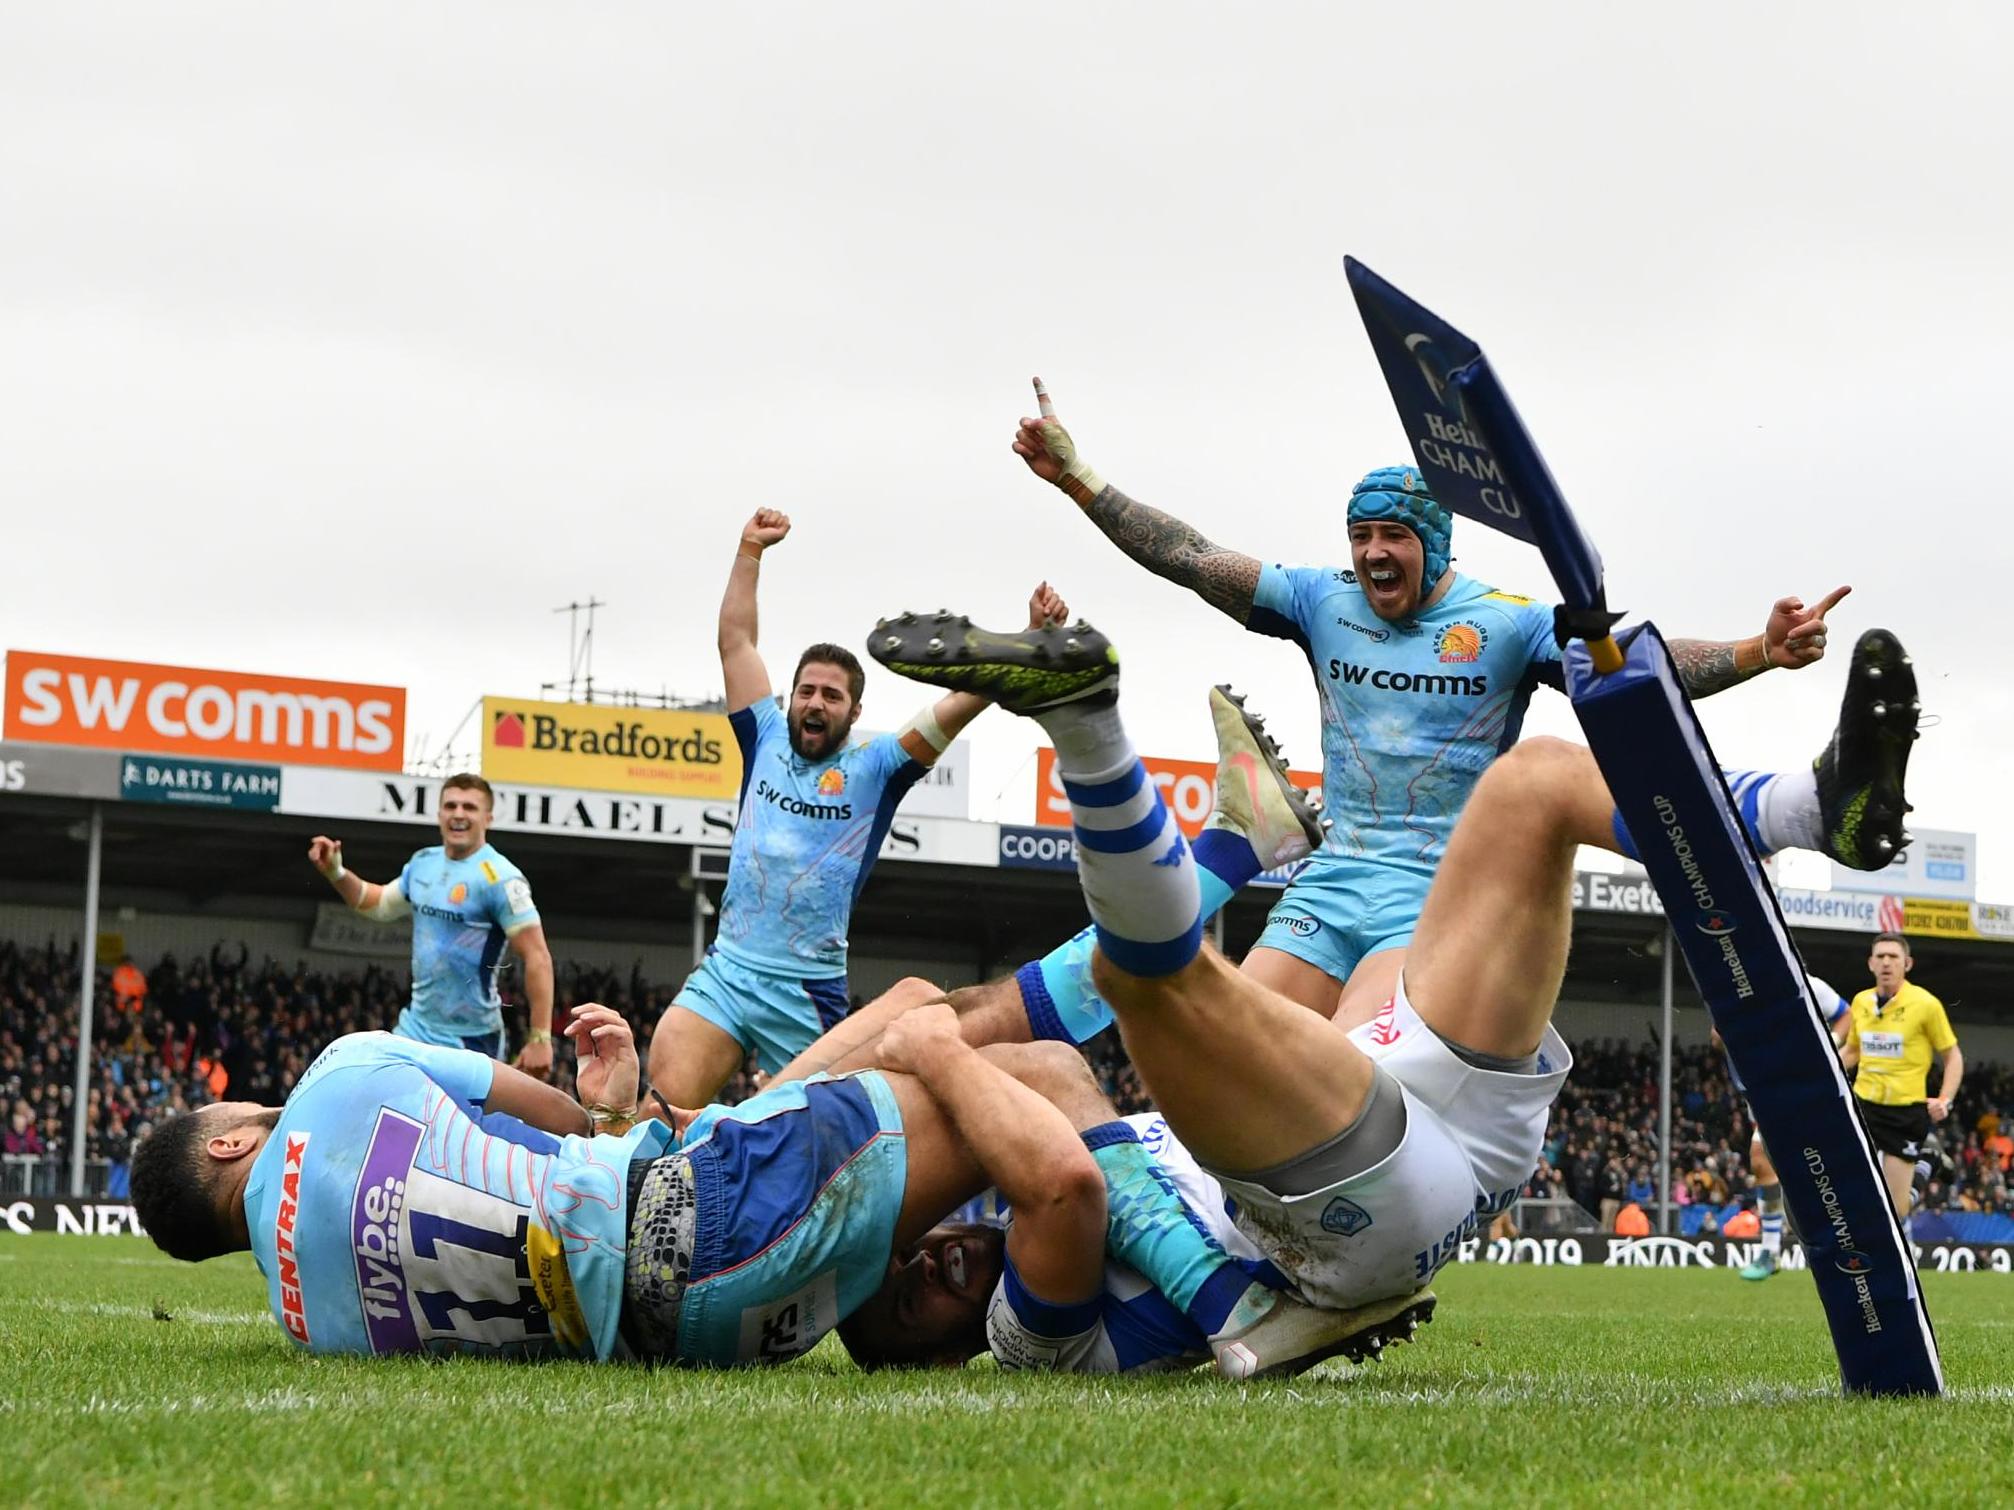 Tom O'Flaherty dives over to score Exeter's fourth try of the match